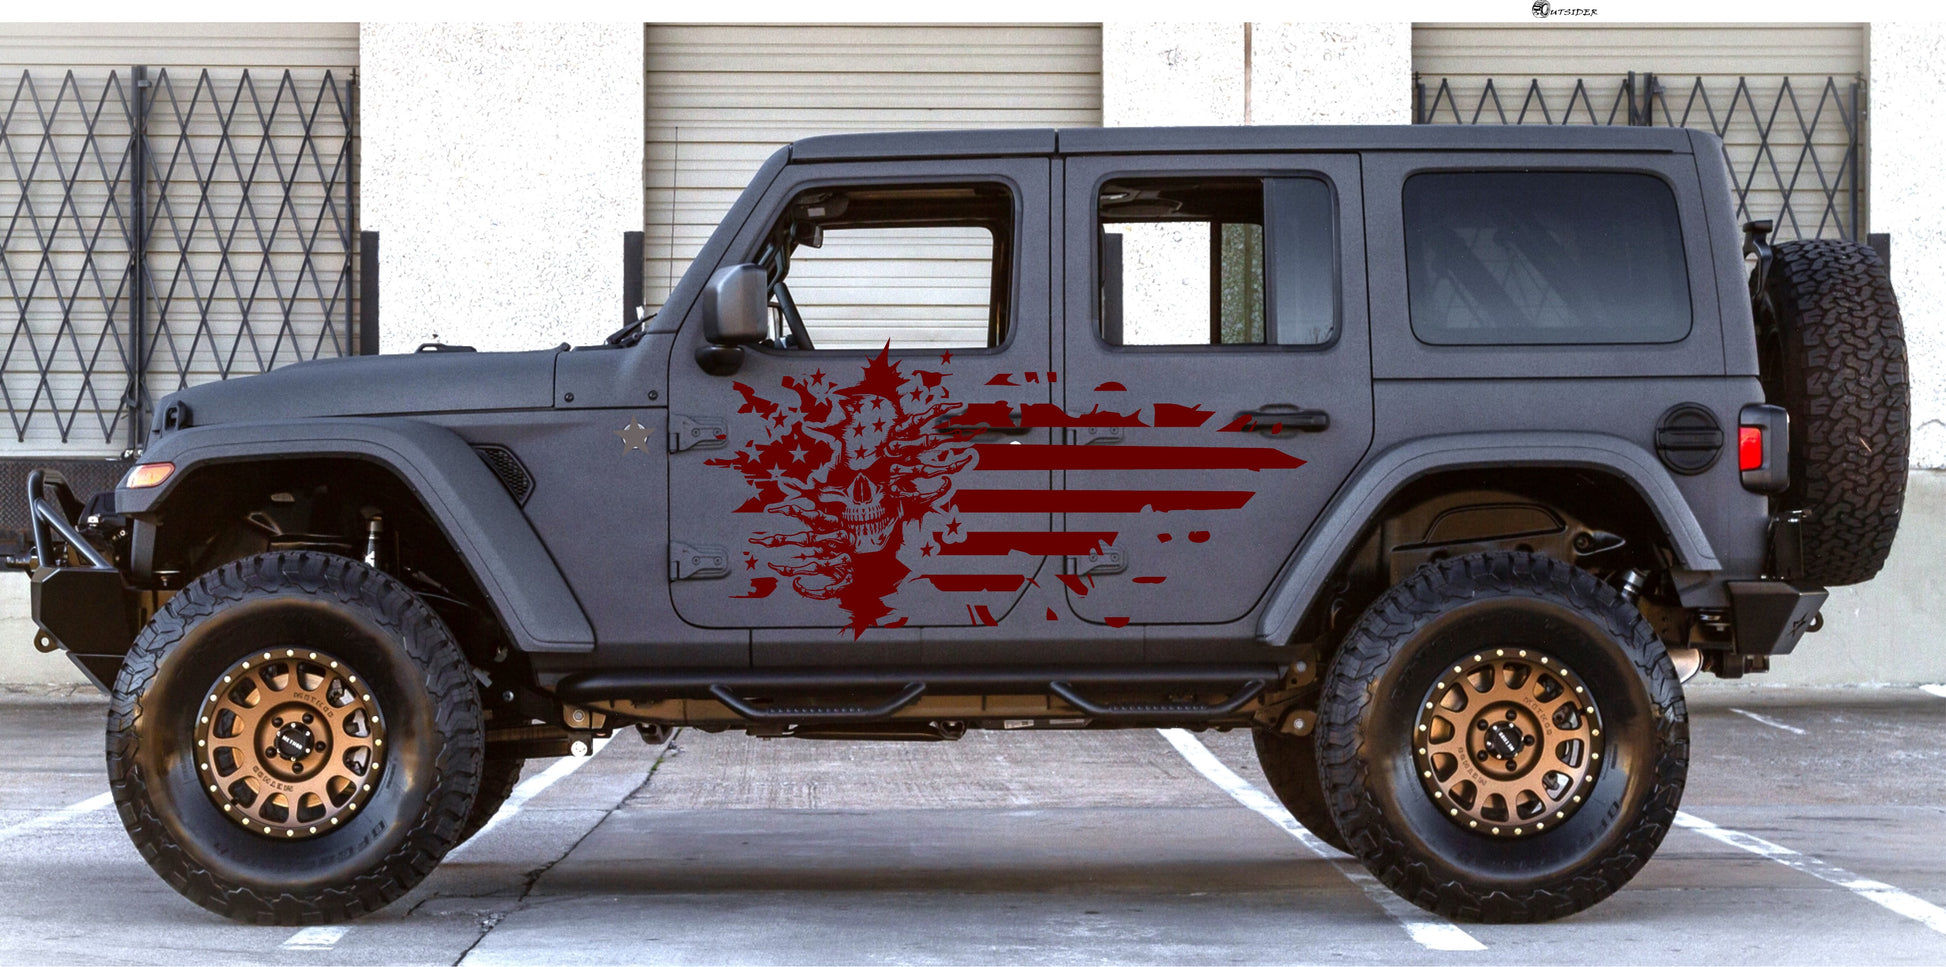 Distressed American Flag w/ Skull Punisher Decal For Jeeps, Trucks, SUVs, Cars